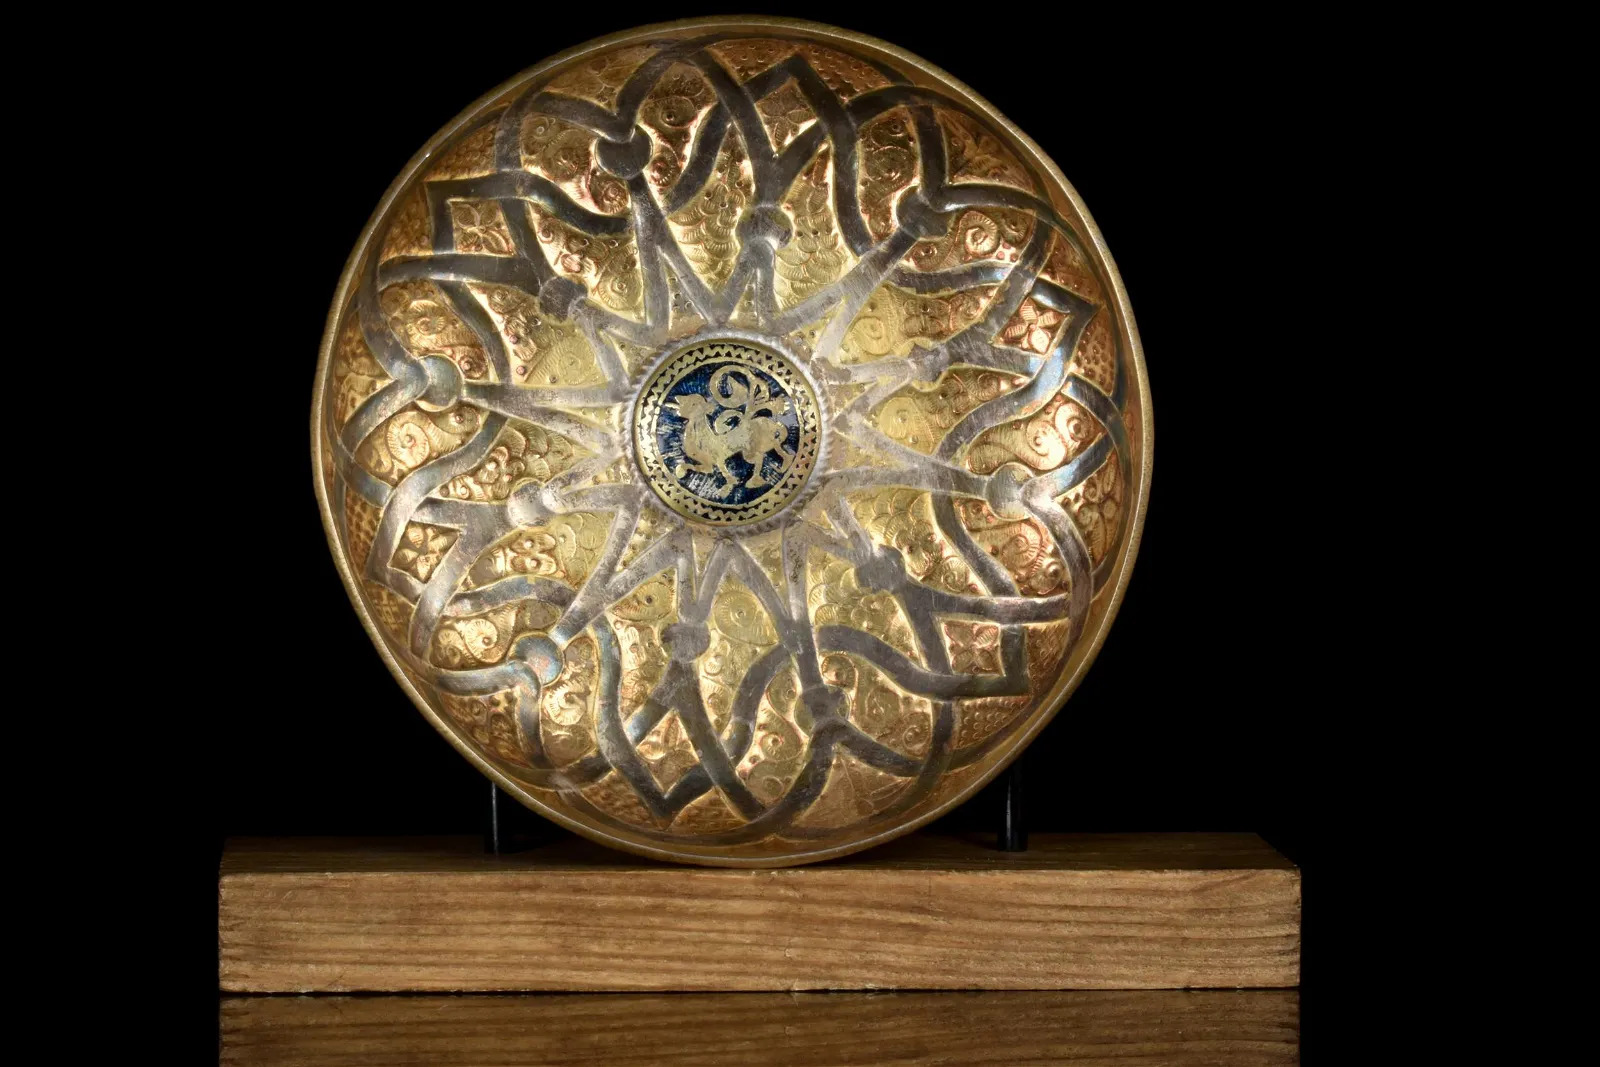 Apollo Art Auctions’ July 24 sale features magnificent antiquities